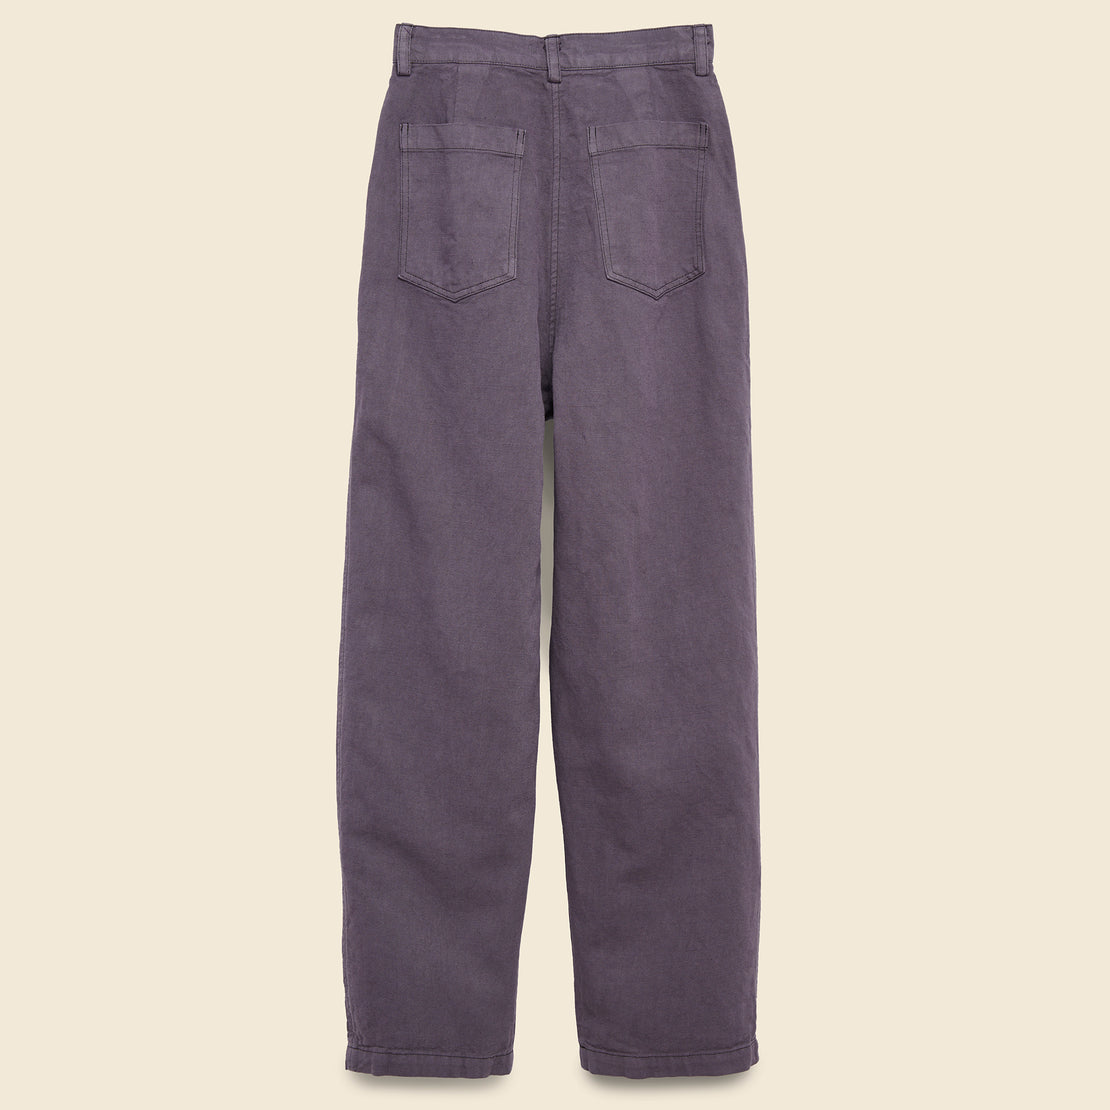 Narrow Cargo Pant - Postal Blue - First Rite - STAG Provisions - W - Pants - Twill